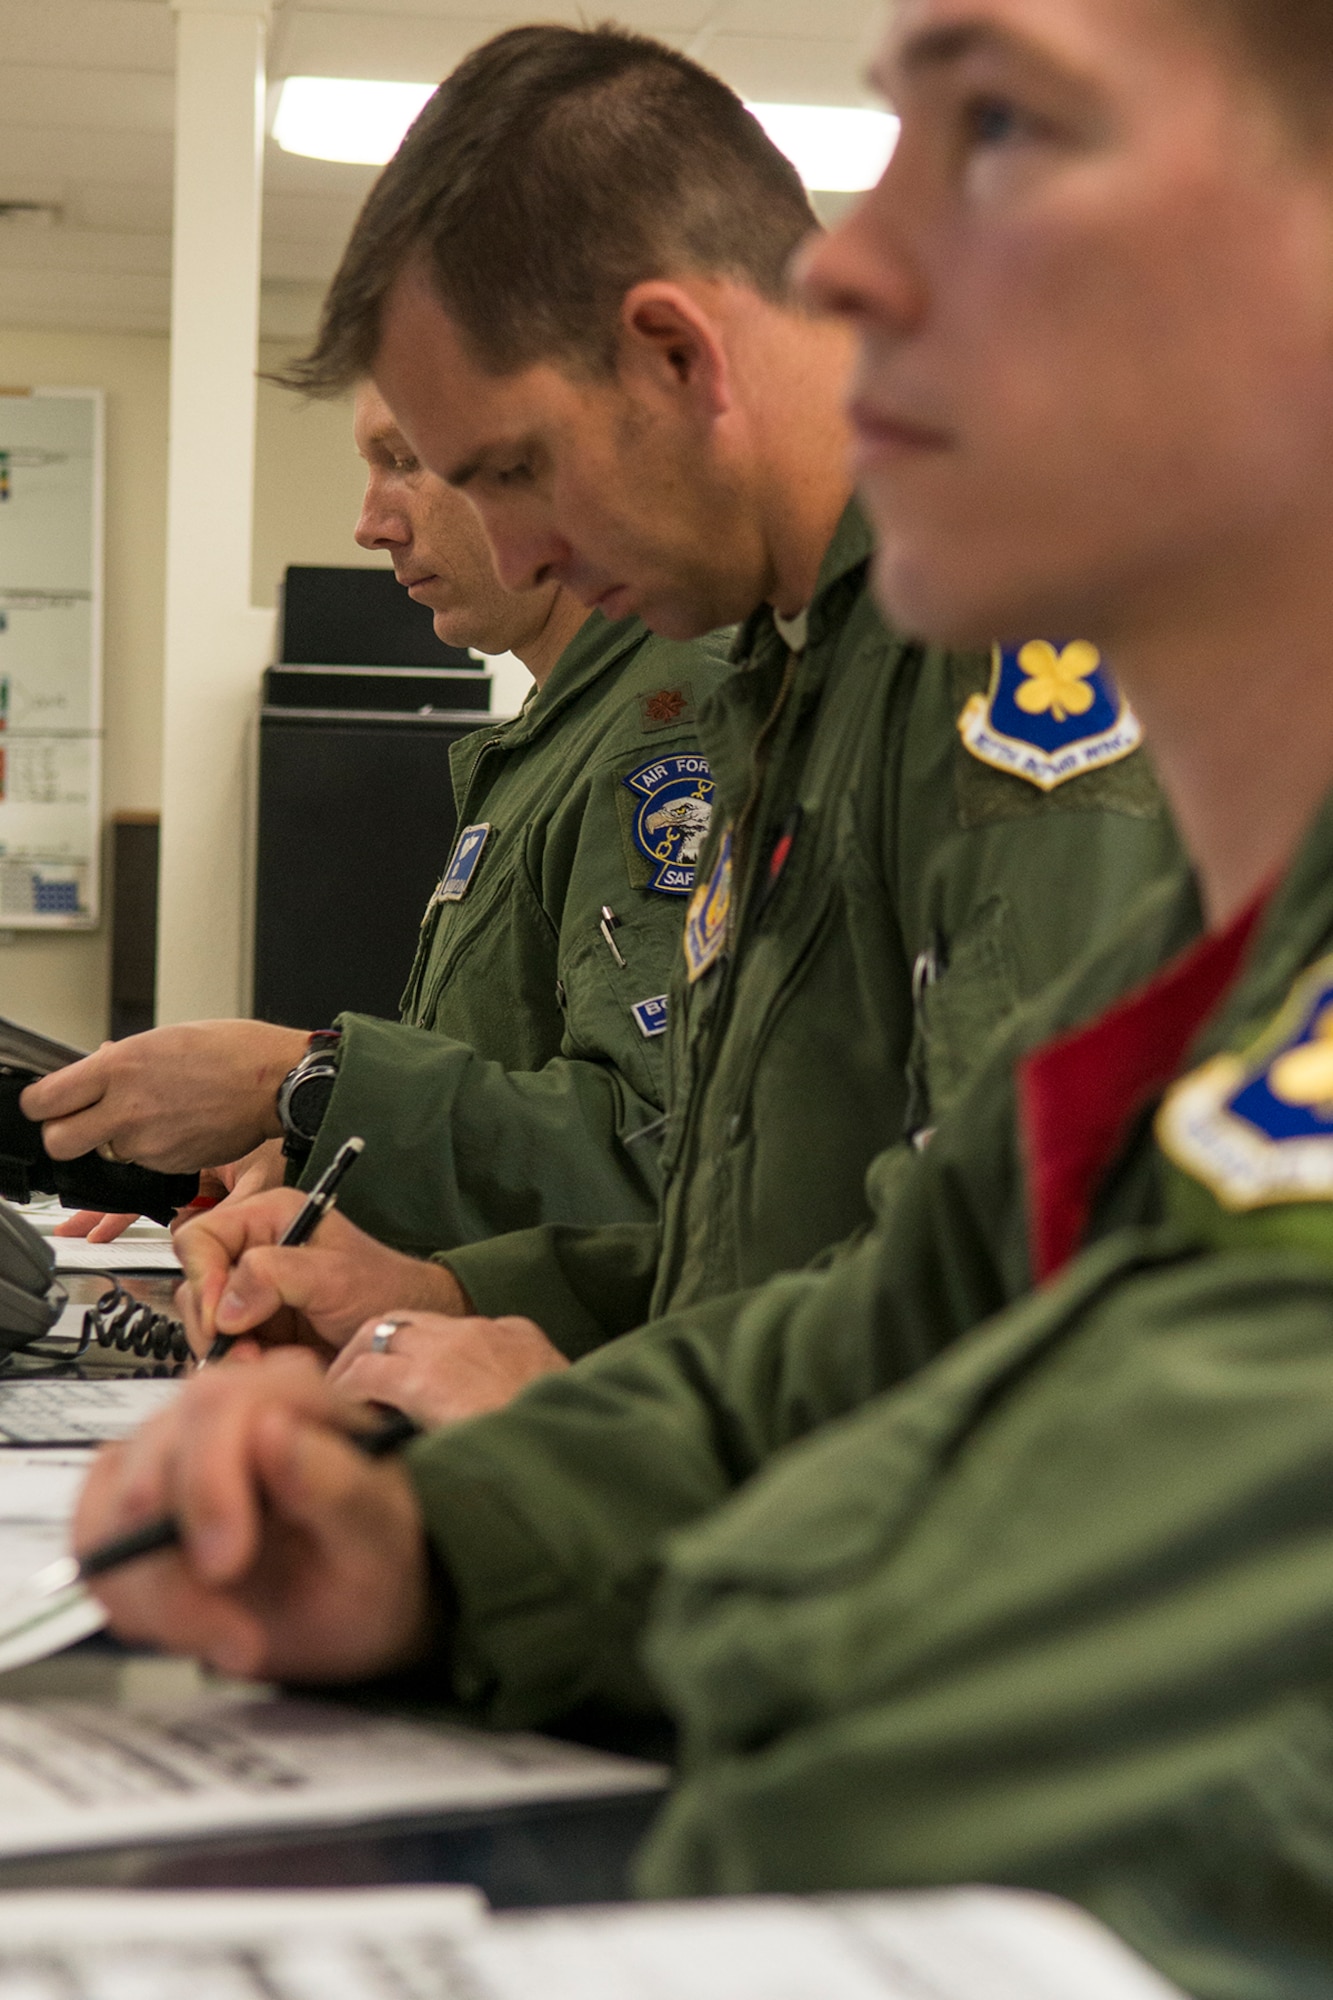 A B-1 Lancer aircrew receive a pre-flight briefing prior to a mission on Feb. 20, 2016, Dyess Air Force Base, Texas. The aircrew consists of three crewmembers assigned to the Air Force Reserve Command’s 345th Bomb Squadron and one member assigned to the 7th Bomb Wing’s 28th Bomb Squadron. (U.S. Air Force photo by Master Sgt. Greg Steele/Released)